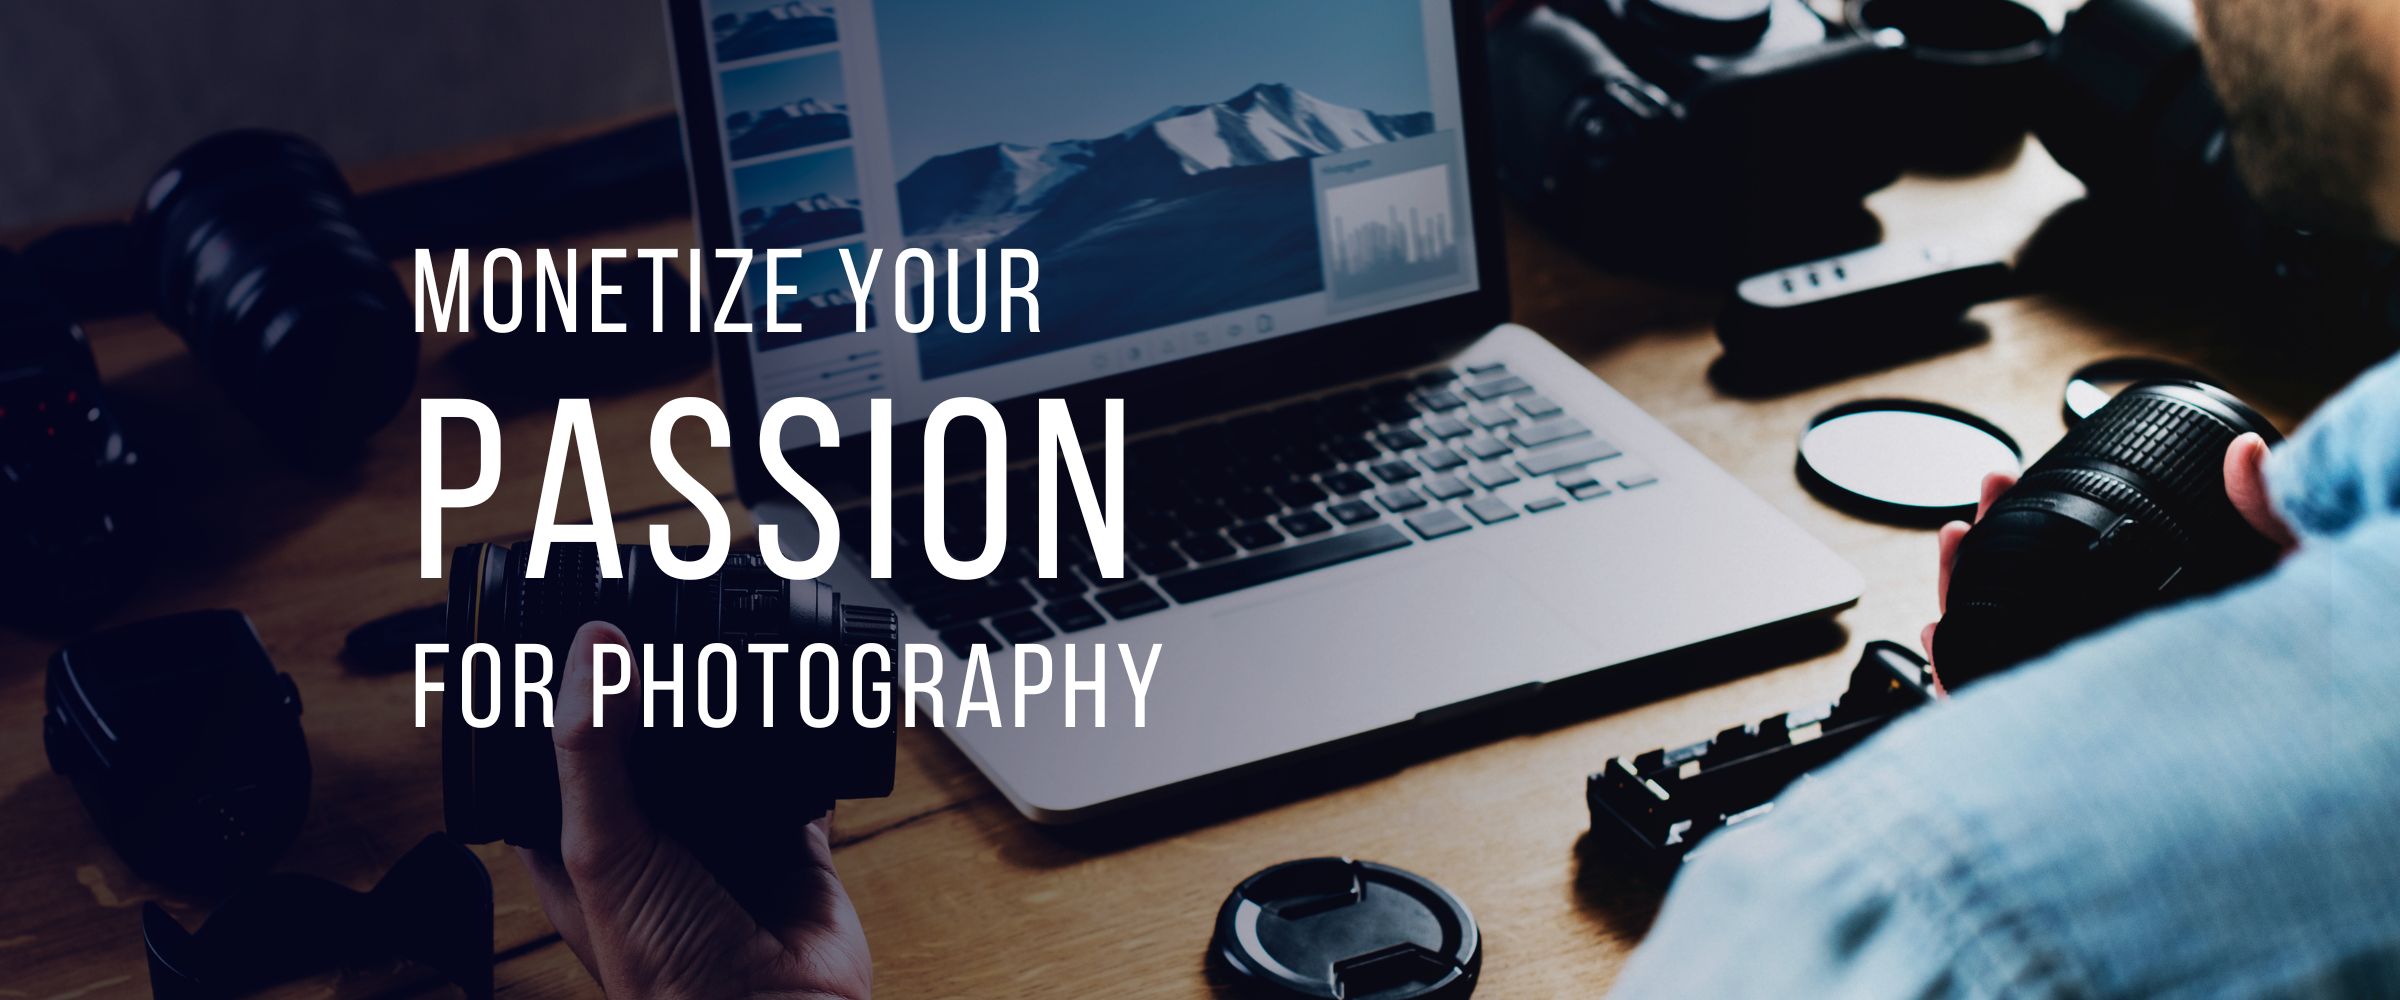 Monetize your Passion for Photography